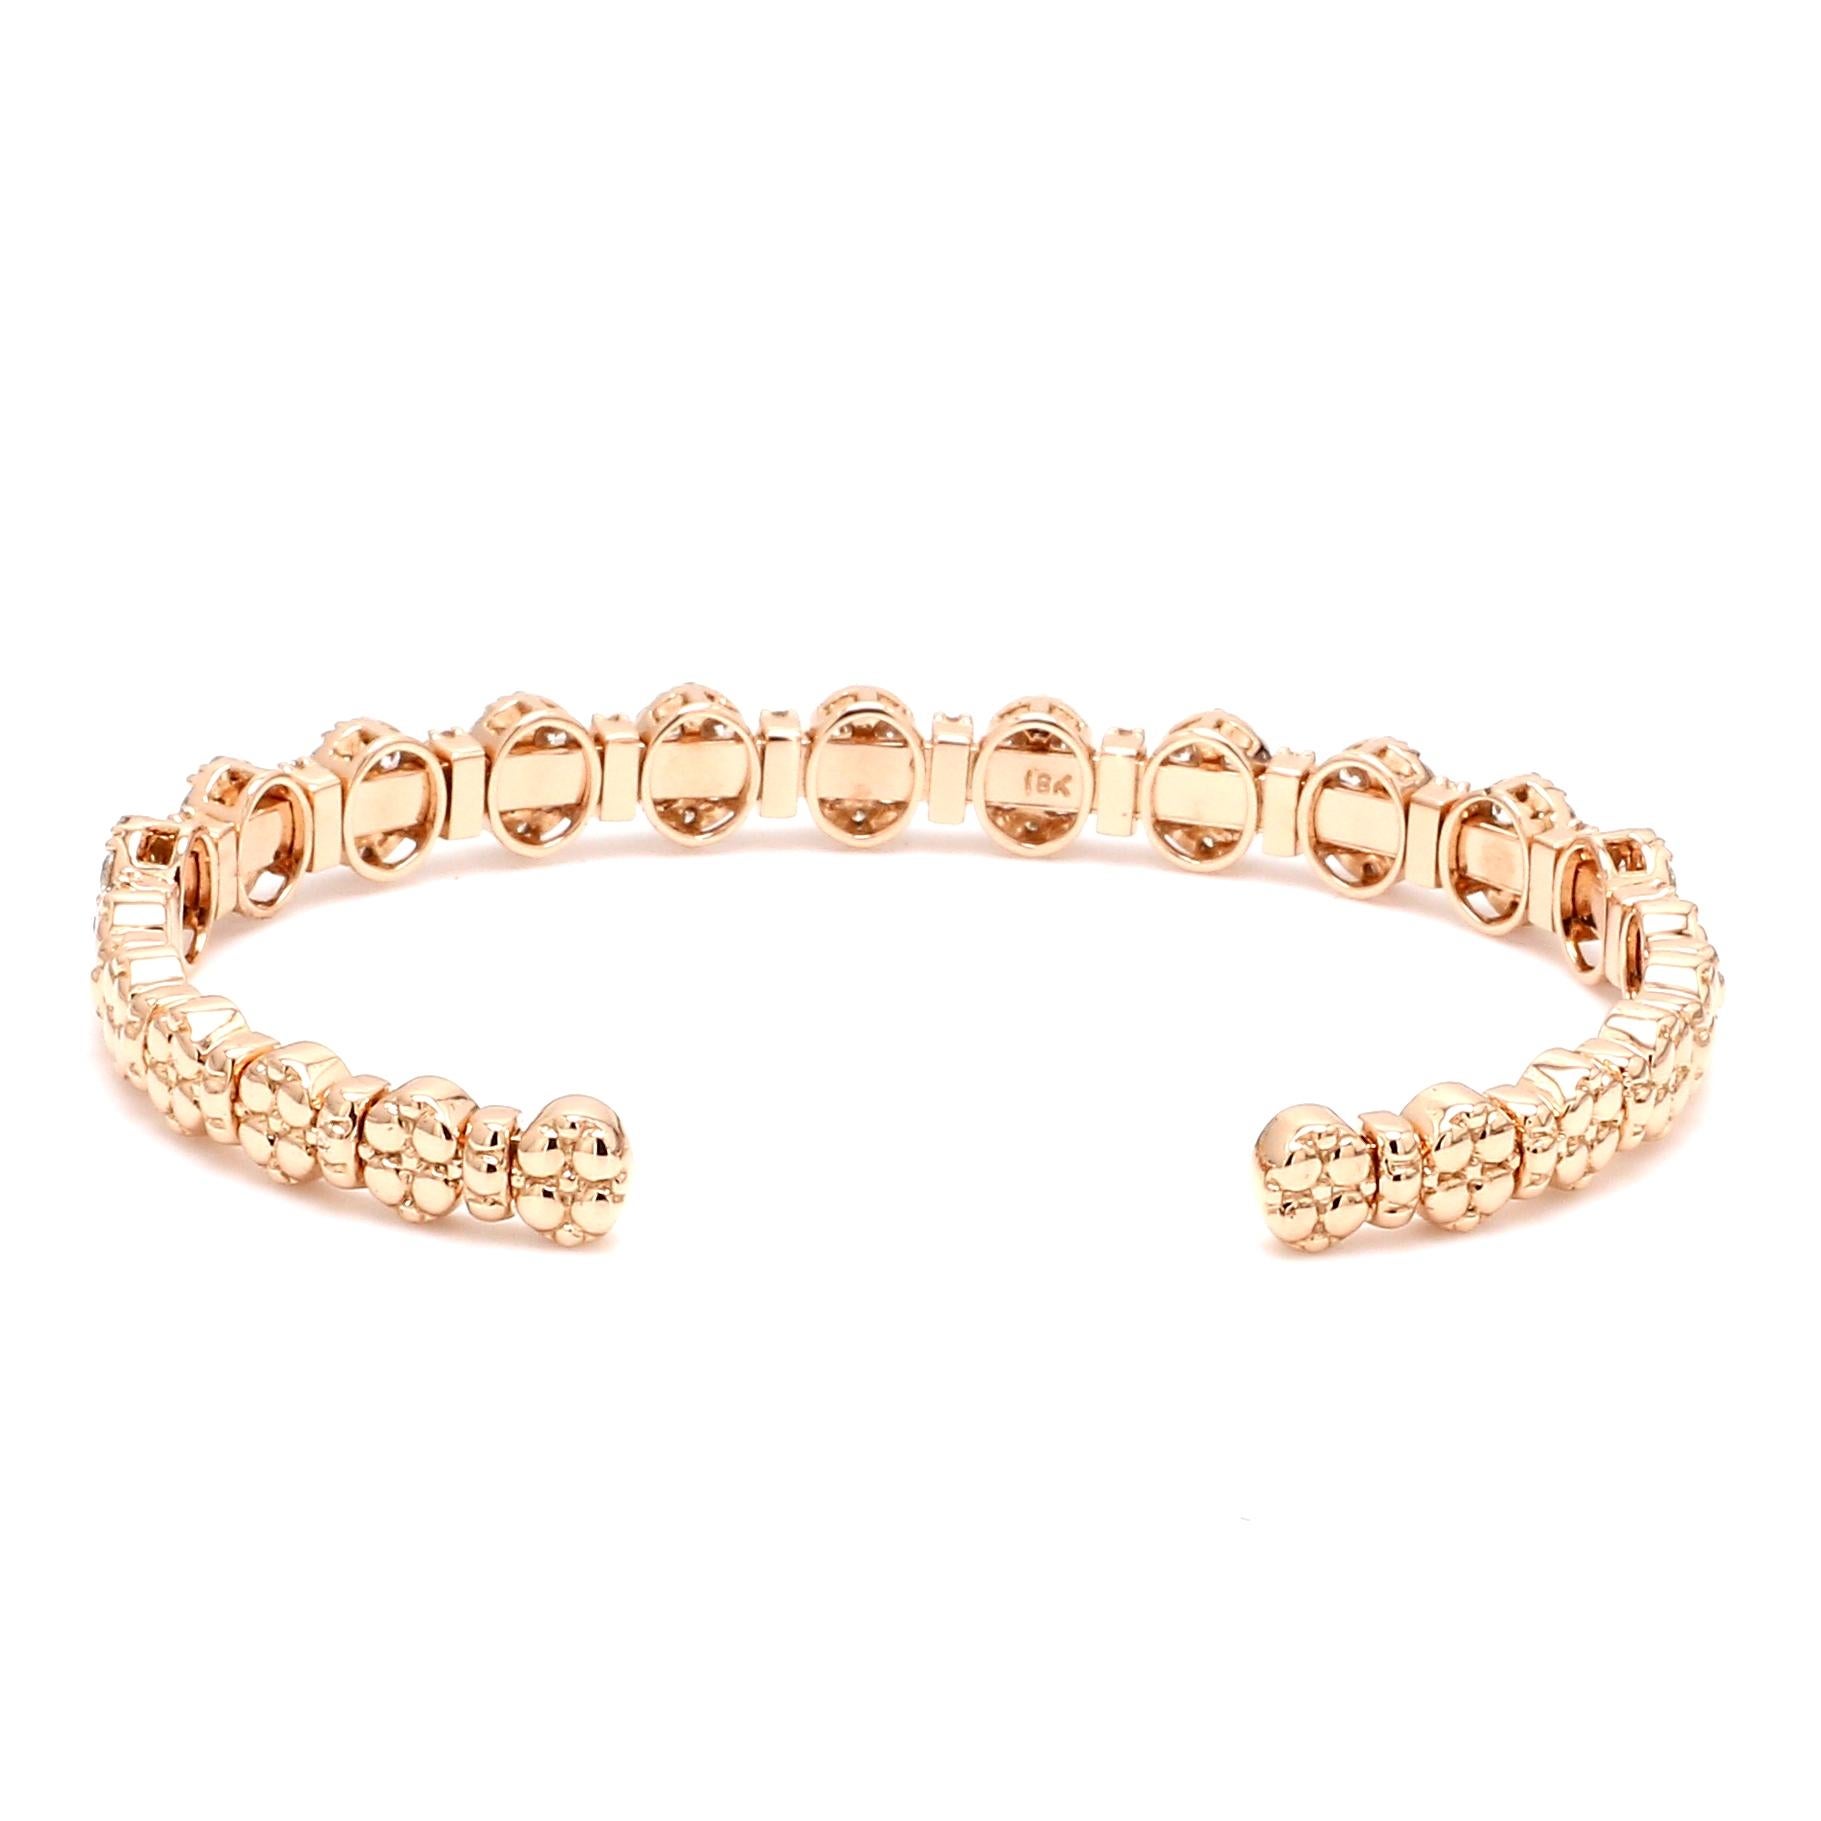 Item Code :- SJBG8003
Gross Wt. :- 16.36 gm
18k Rose Gold Wt. :- 15.80 gm
Diamond Wt. :- 2.80 Ct. ( AVERAGE DIAMOND CLARITY SI1-SI2 & COLOR H-I )
Bangle Size :- 2.2 Ana

✦ Sizing
.....................
We can adjust most items to fit your sizing